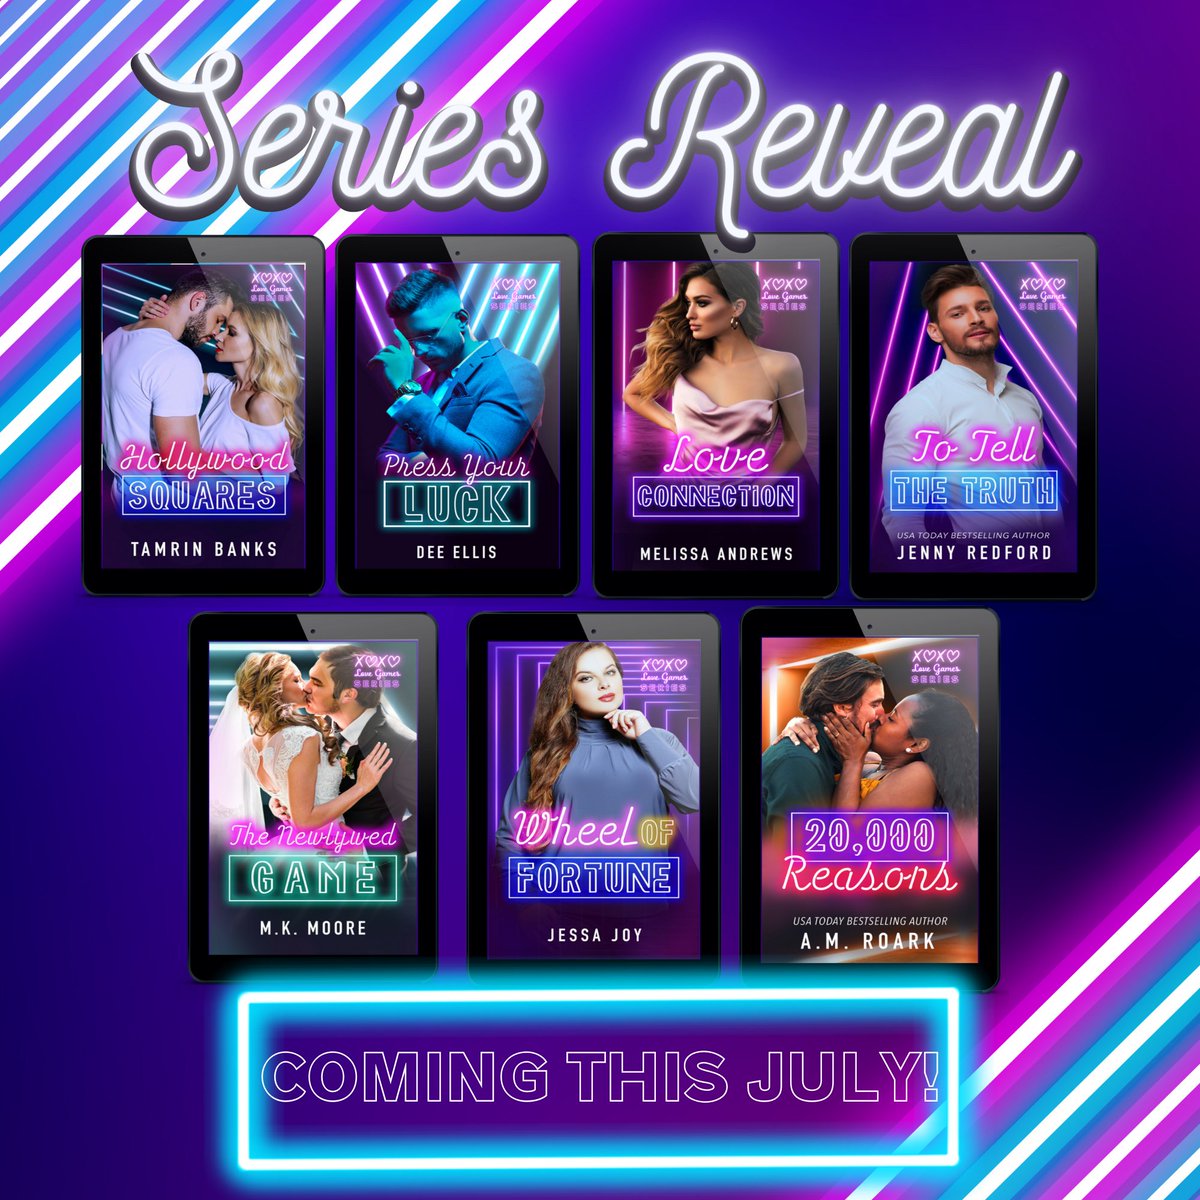 Series Reveal!!

Let's play some Love Games! 

Whether you want to name that price on Price is Right, Make a Deal, or meet a new love on Love Connection, this series is the one for you!

#seriesreveal #lovegames #ComingThisJuly #instalove #multiauthorseries